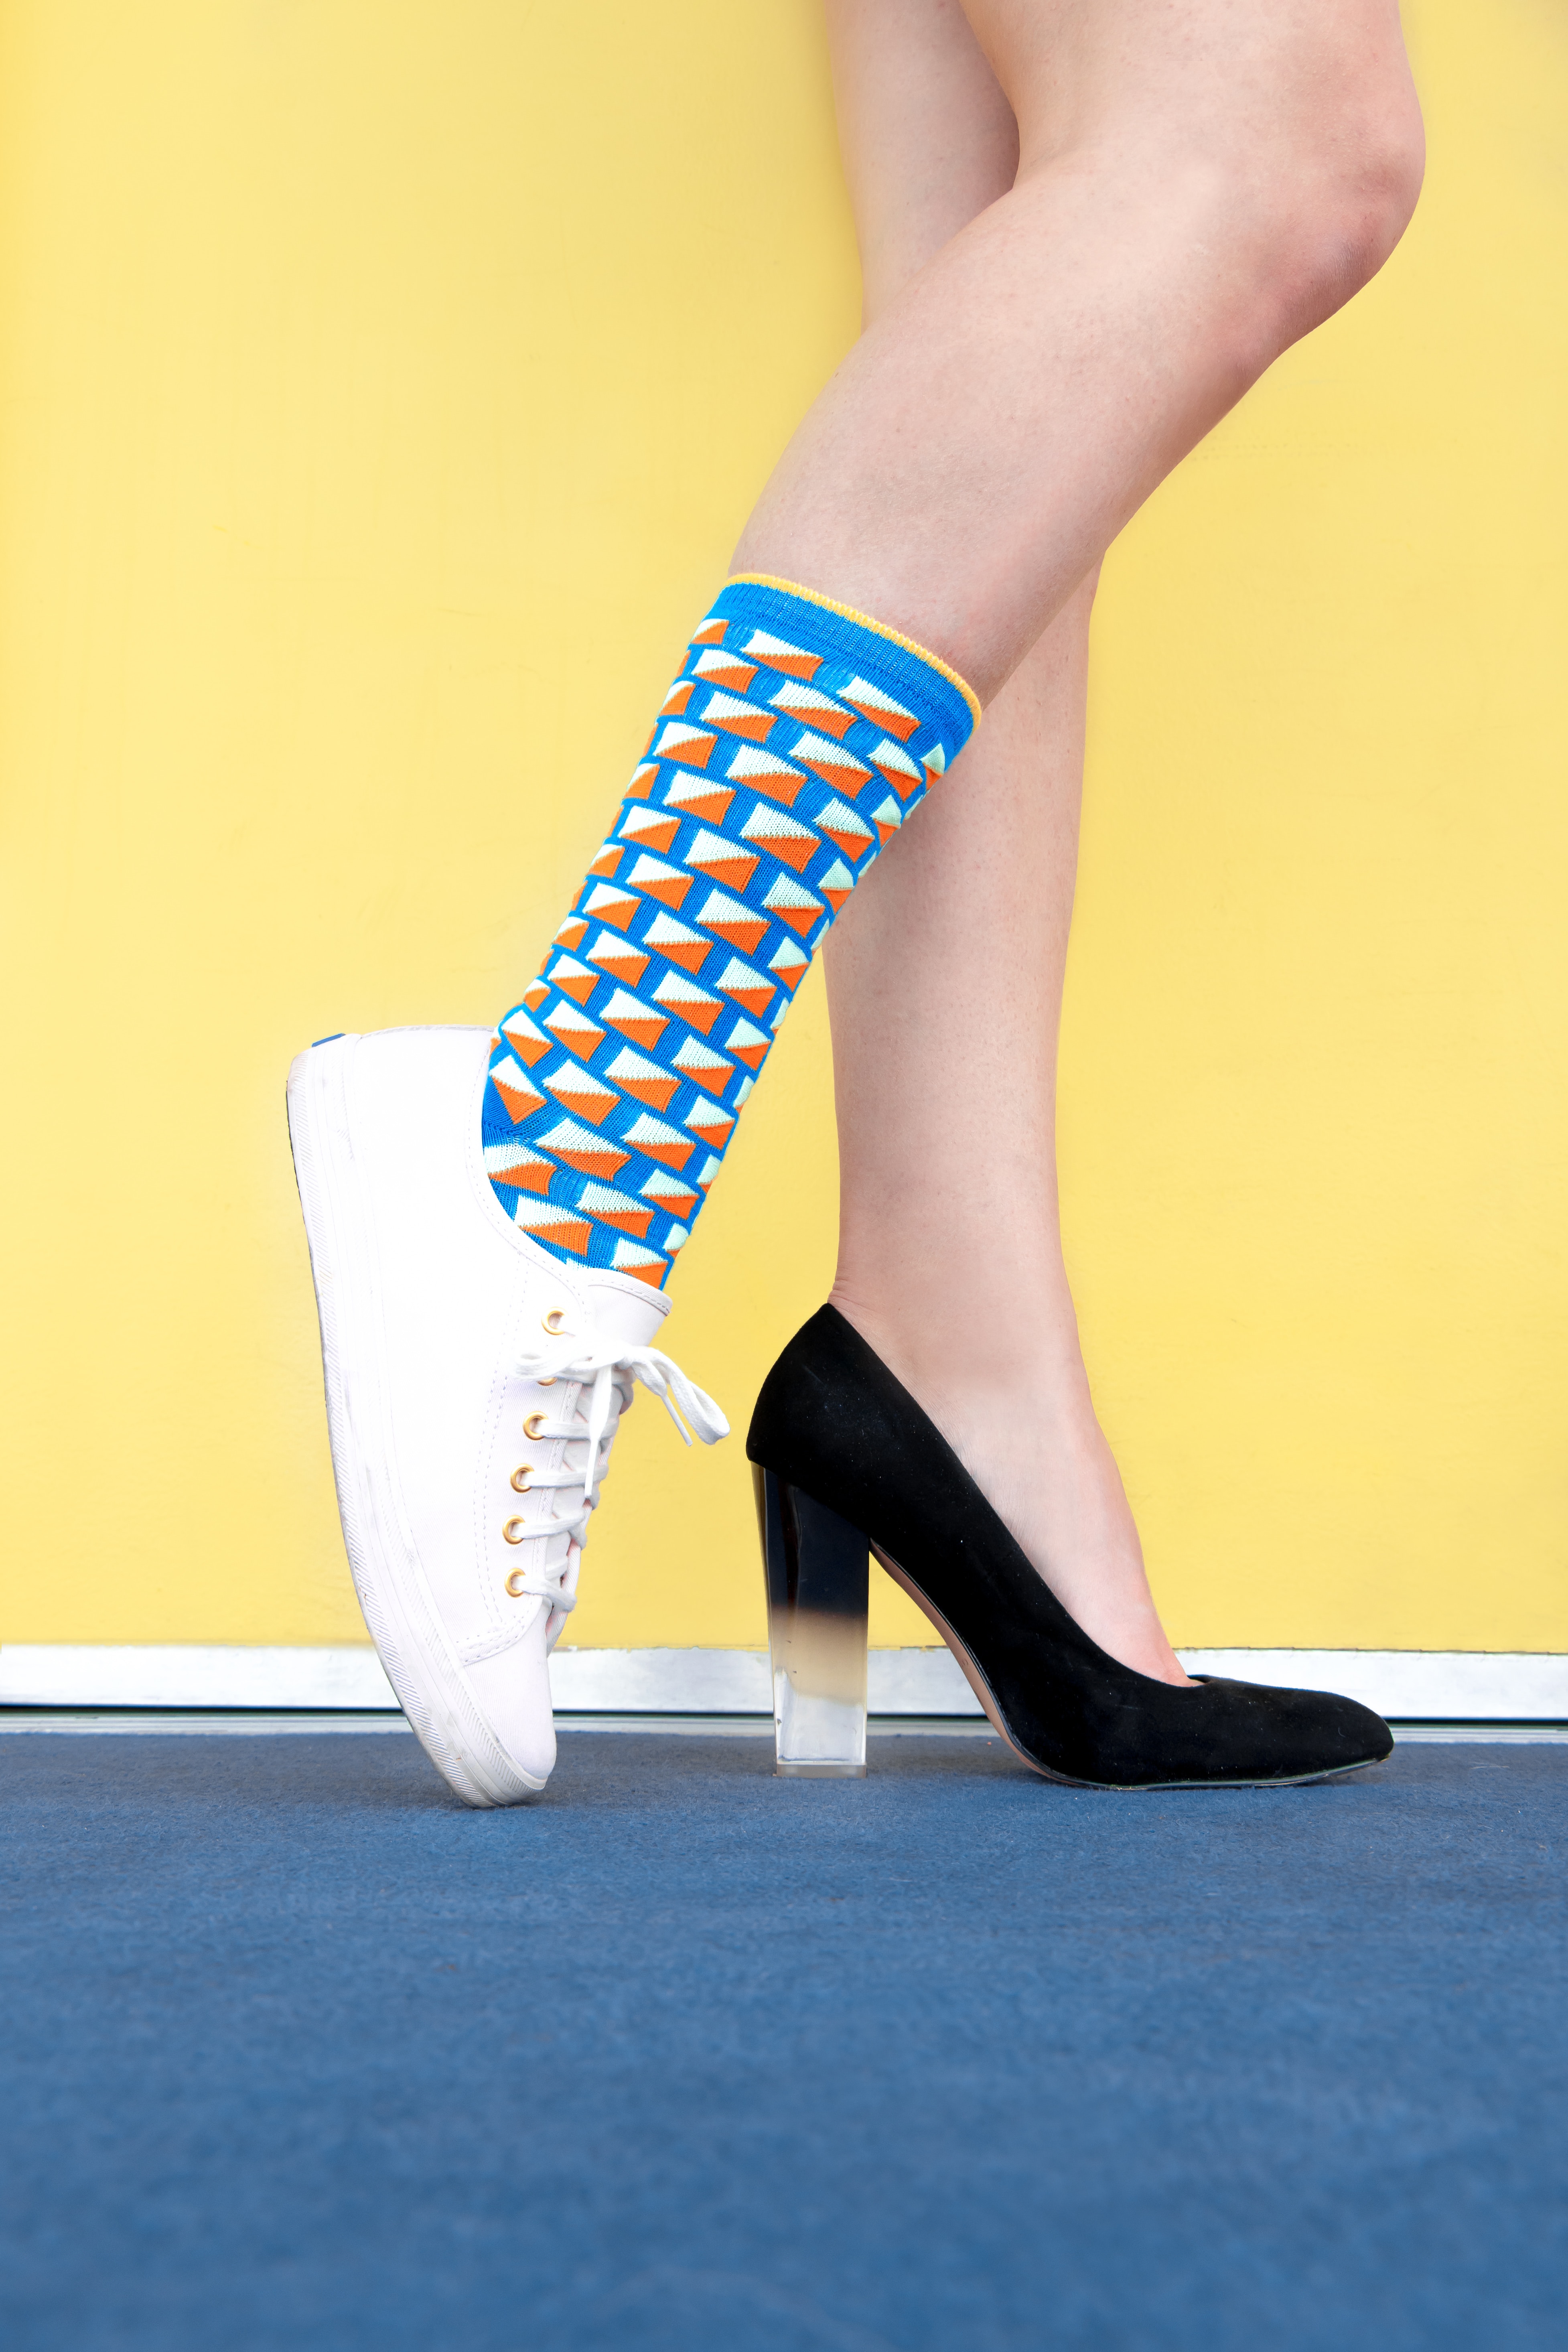 An individual wearing two different shoes with a colorful sock. | Source: Unsplash